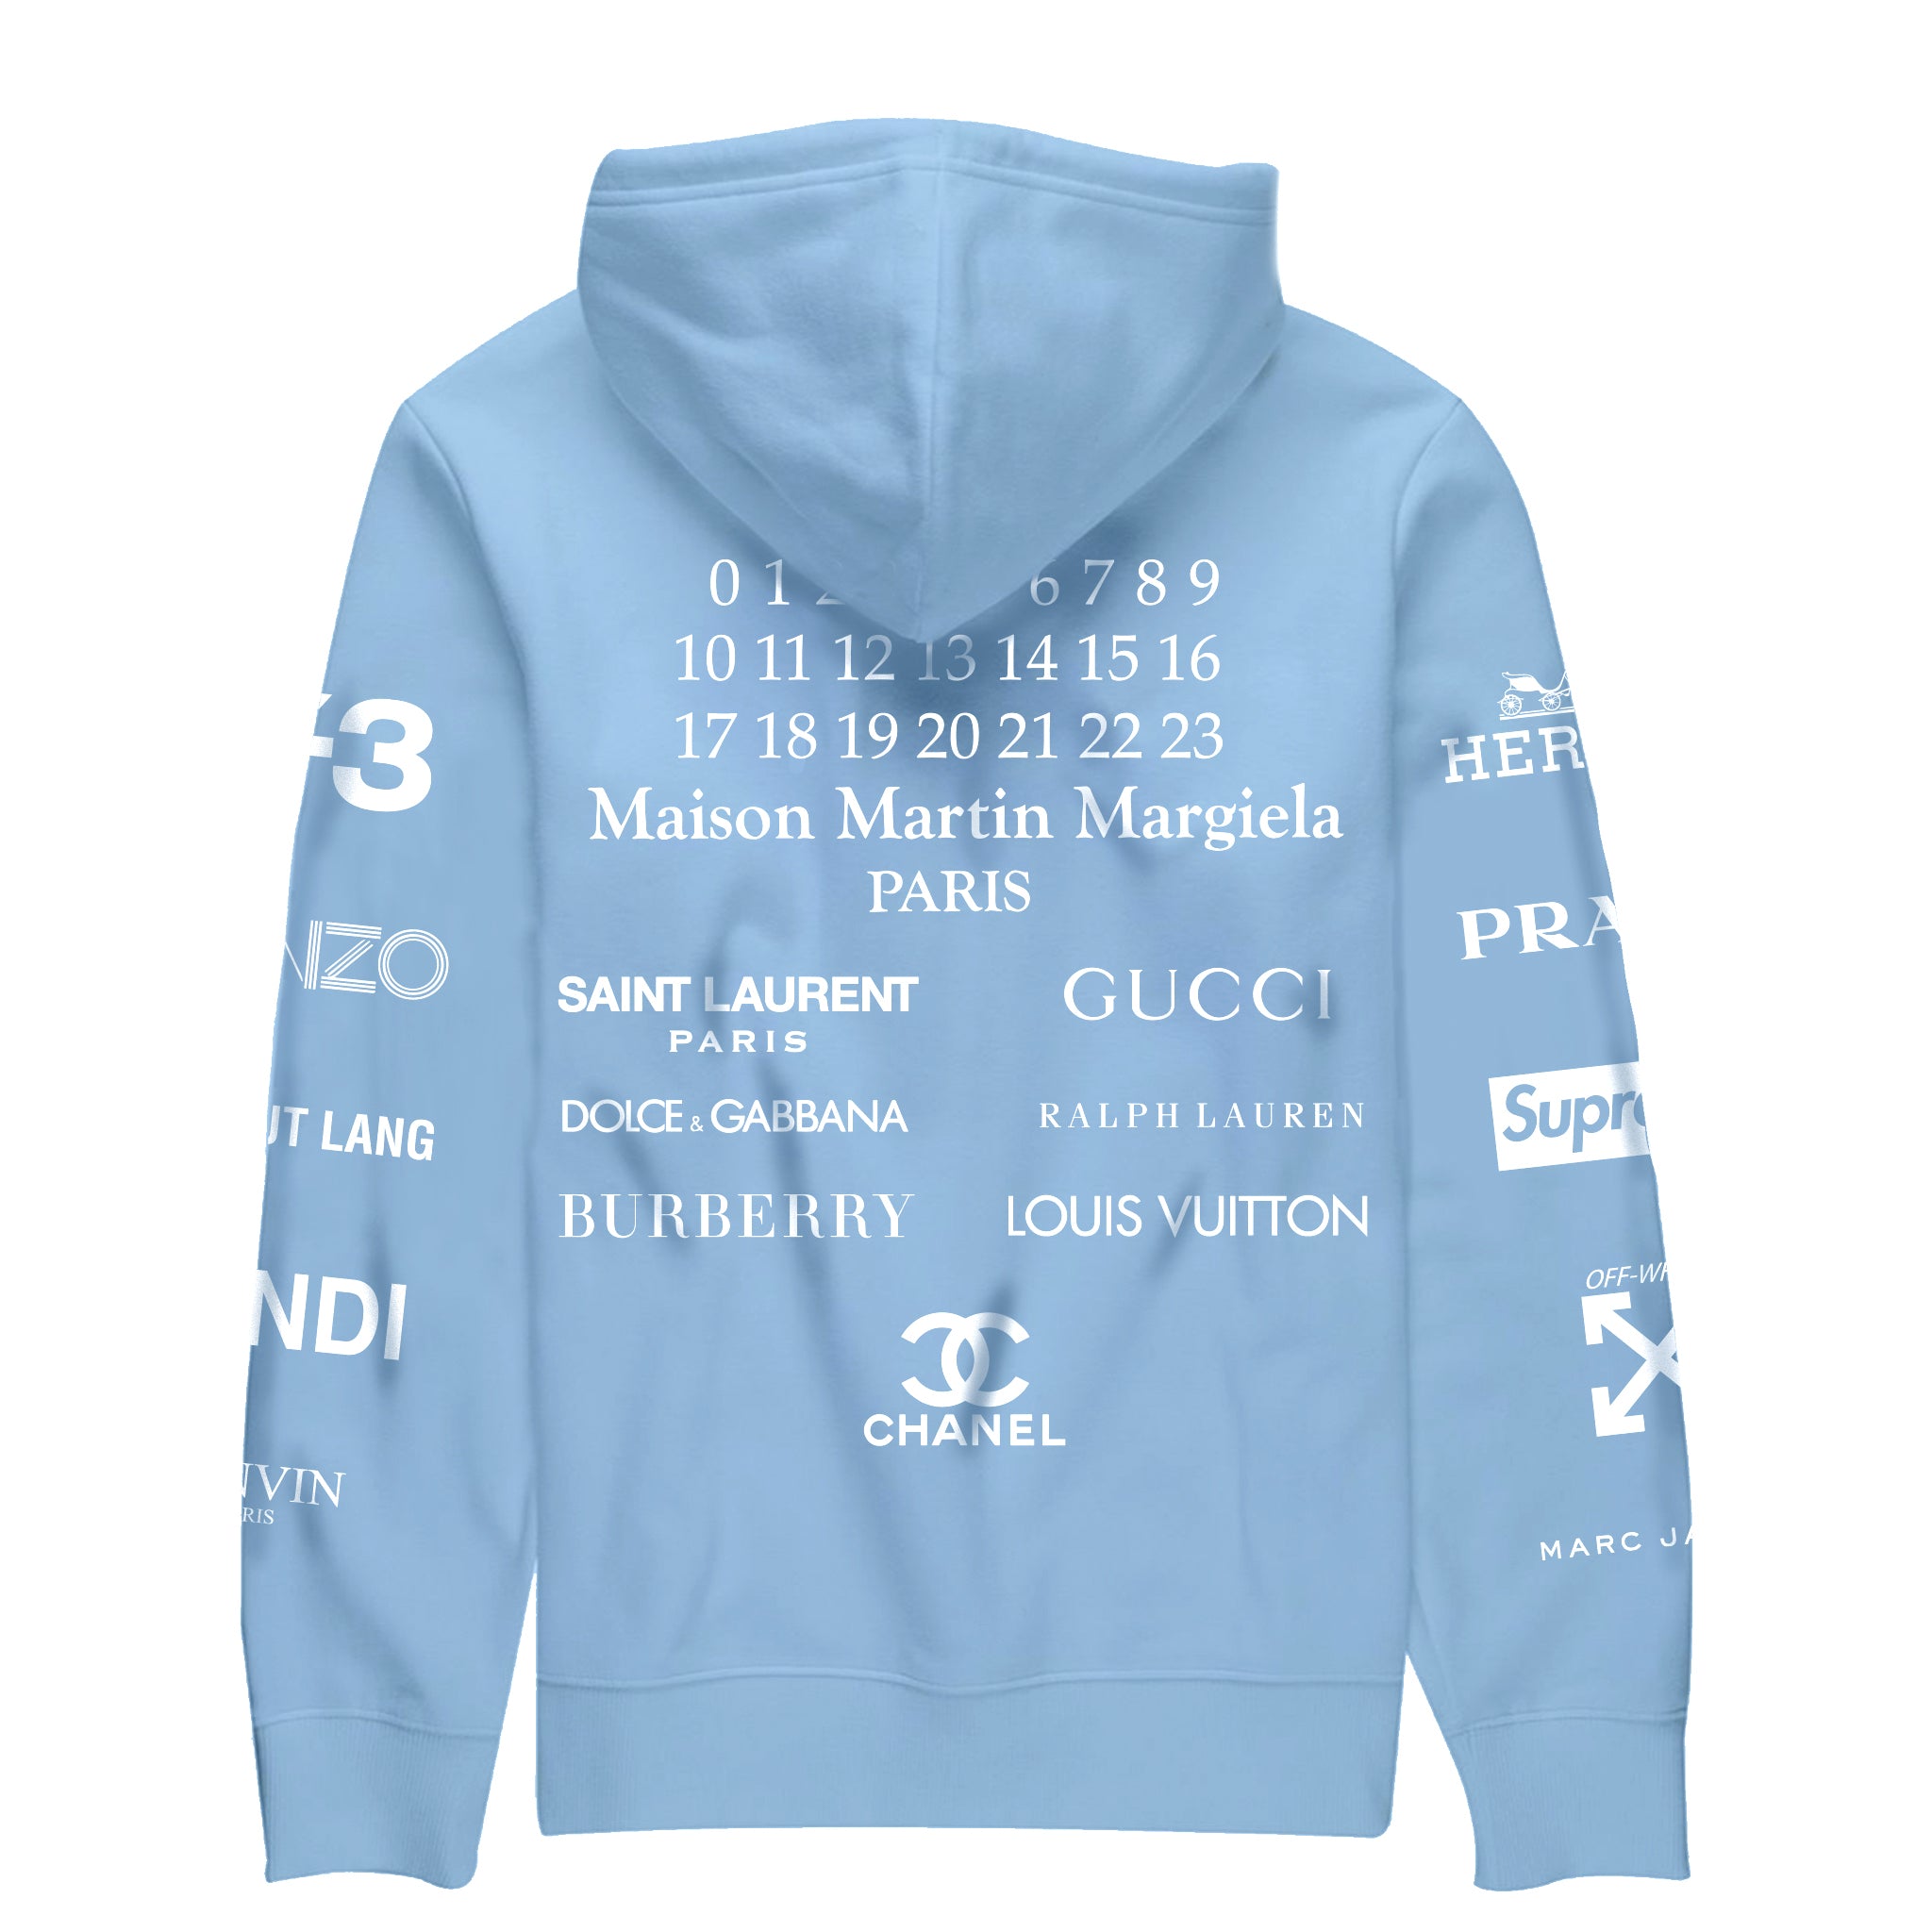 Summer Sale Preview - Get 40% off this Blues Hoodie in adult and